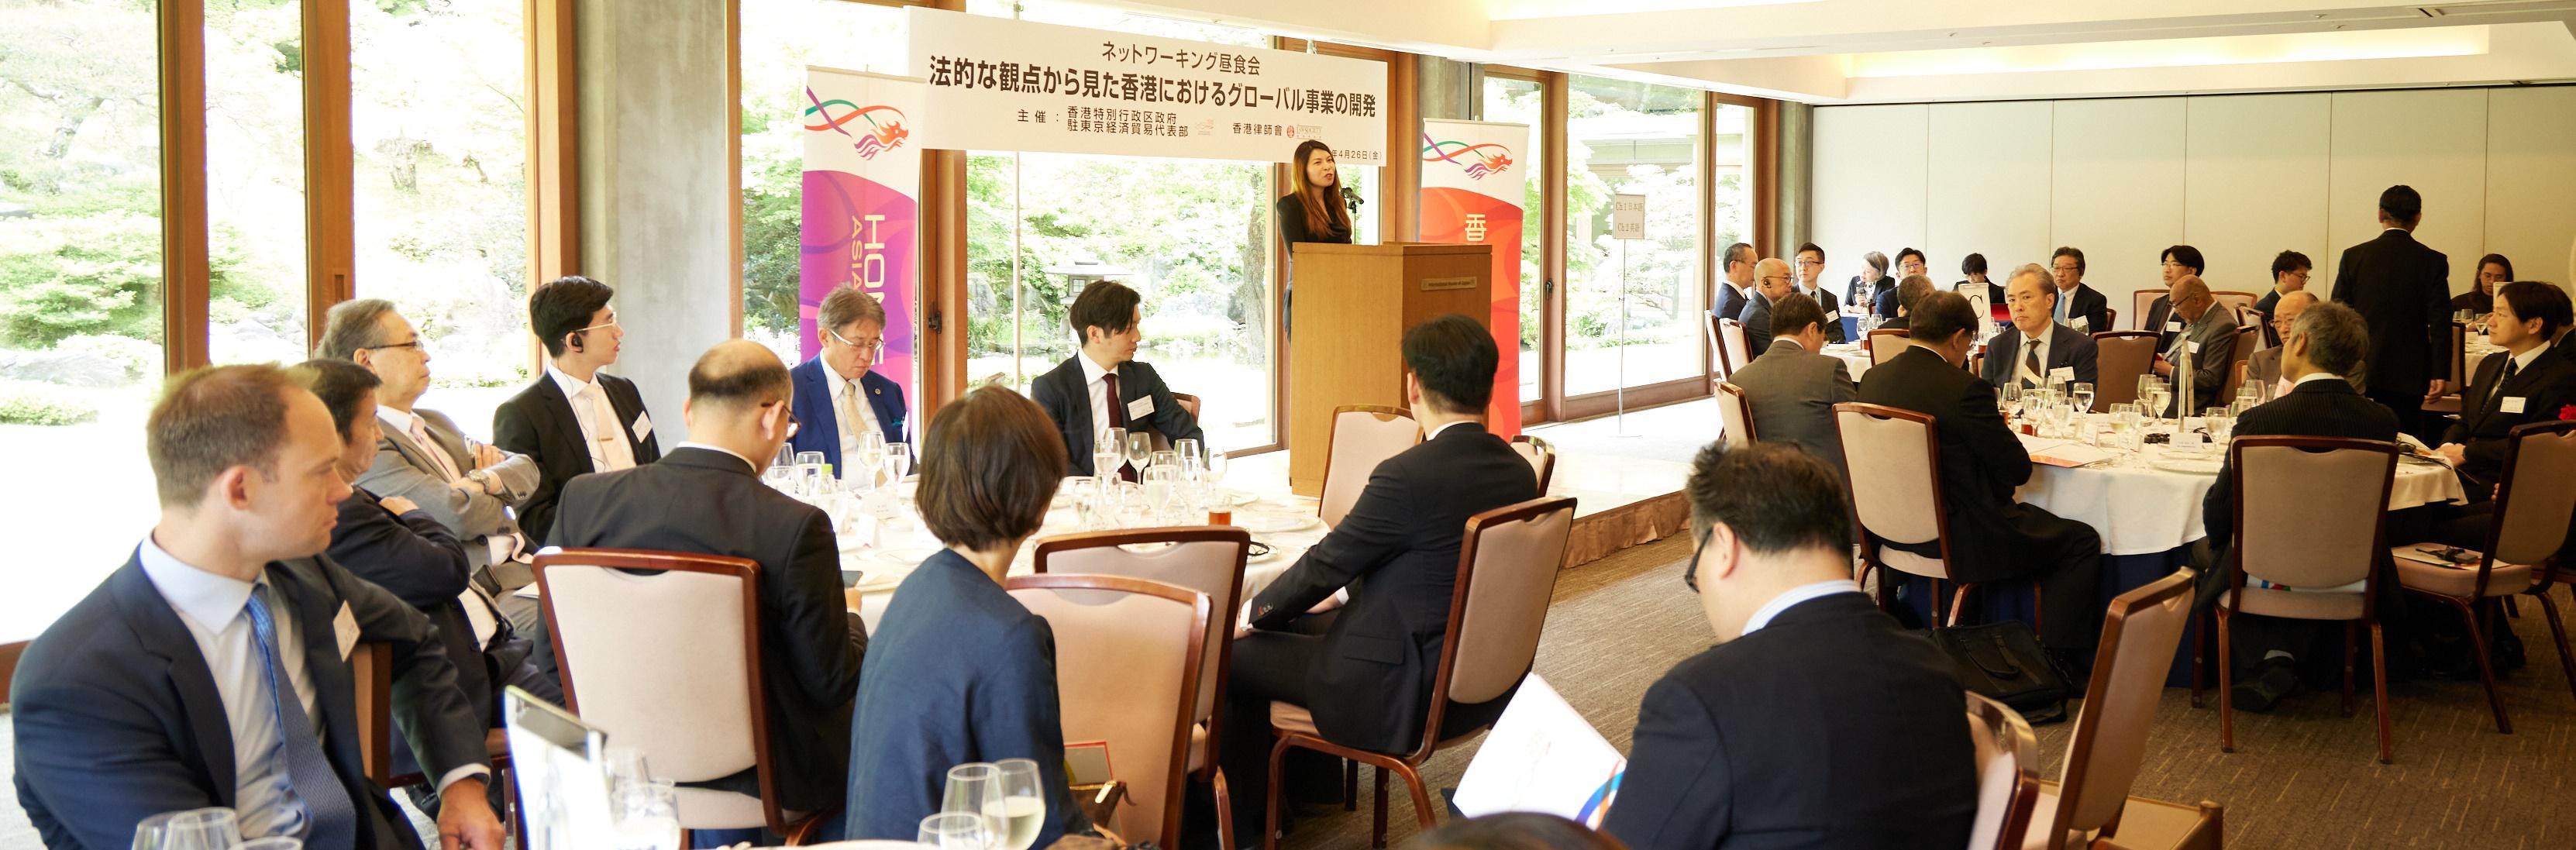 The Principal Hong Kong Economic and Trade Representative (Tokyo), Miss Winsome Au, speaks at the networking luncheon jointly held by the Hong Kong Economic and Trade Office (Tokyo) and the Law Society of Hong Kong in Tokyo, Japan, today (April 26).